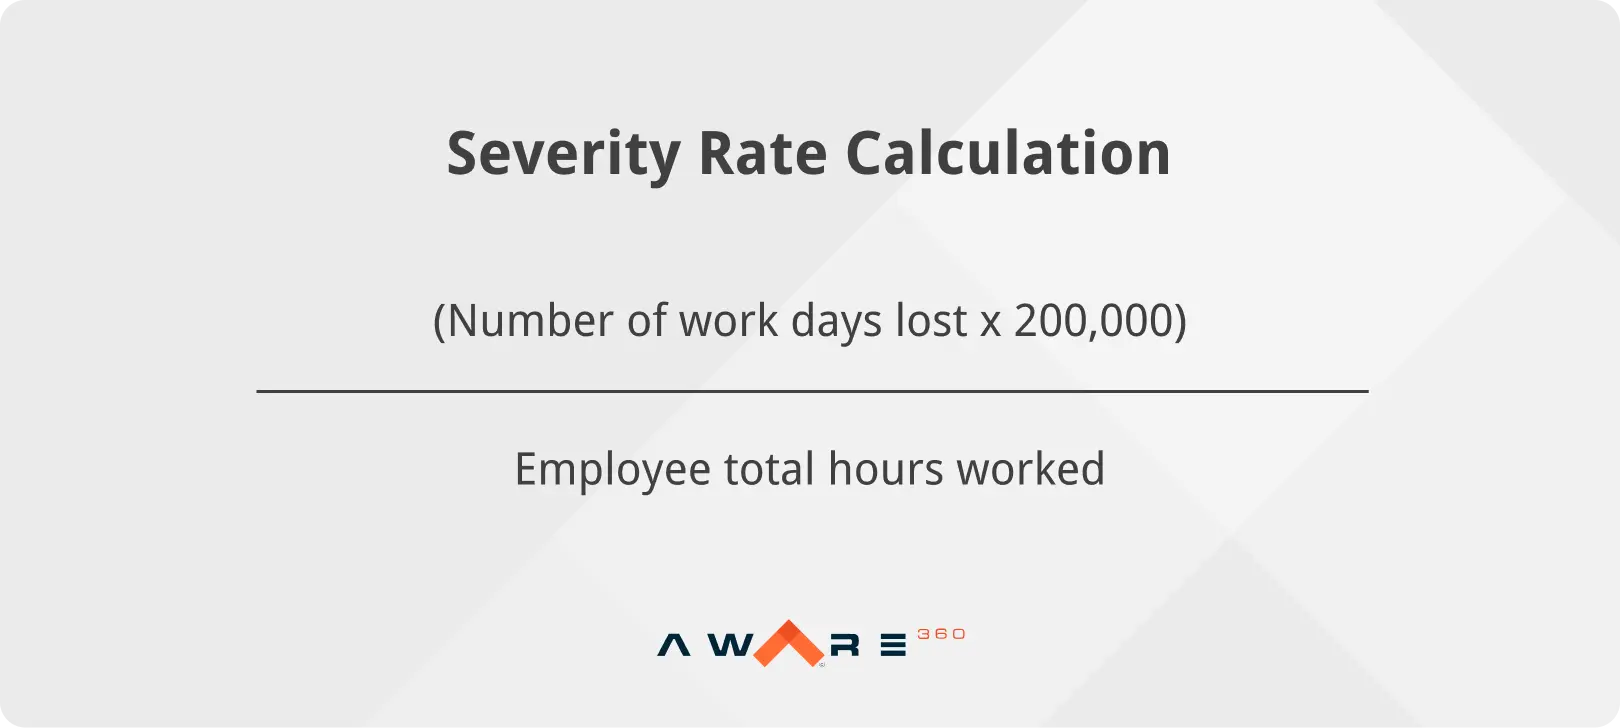 Severity rate calculation [Aware360]